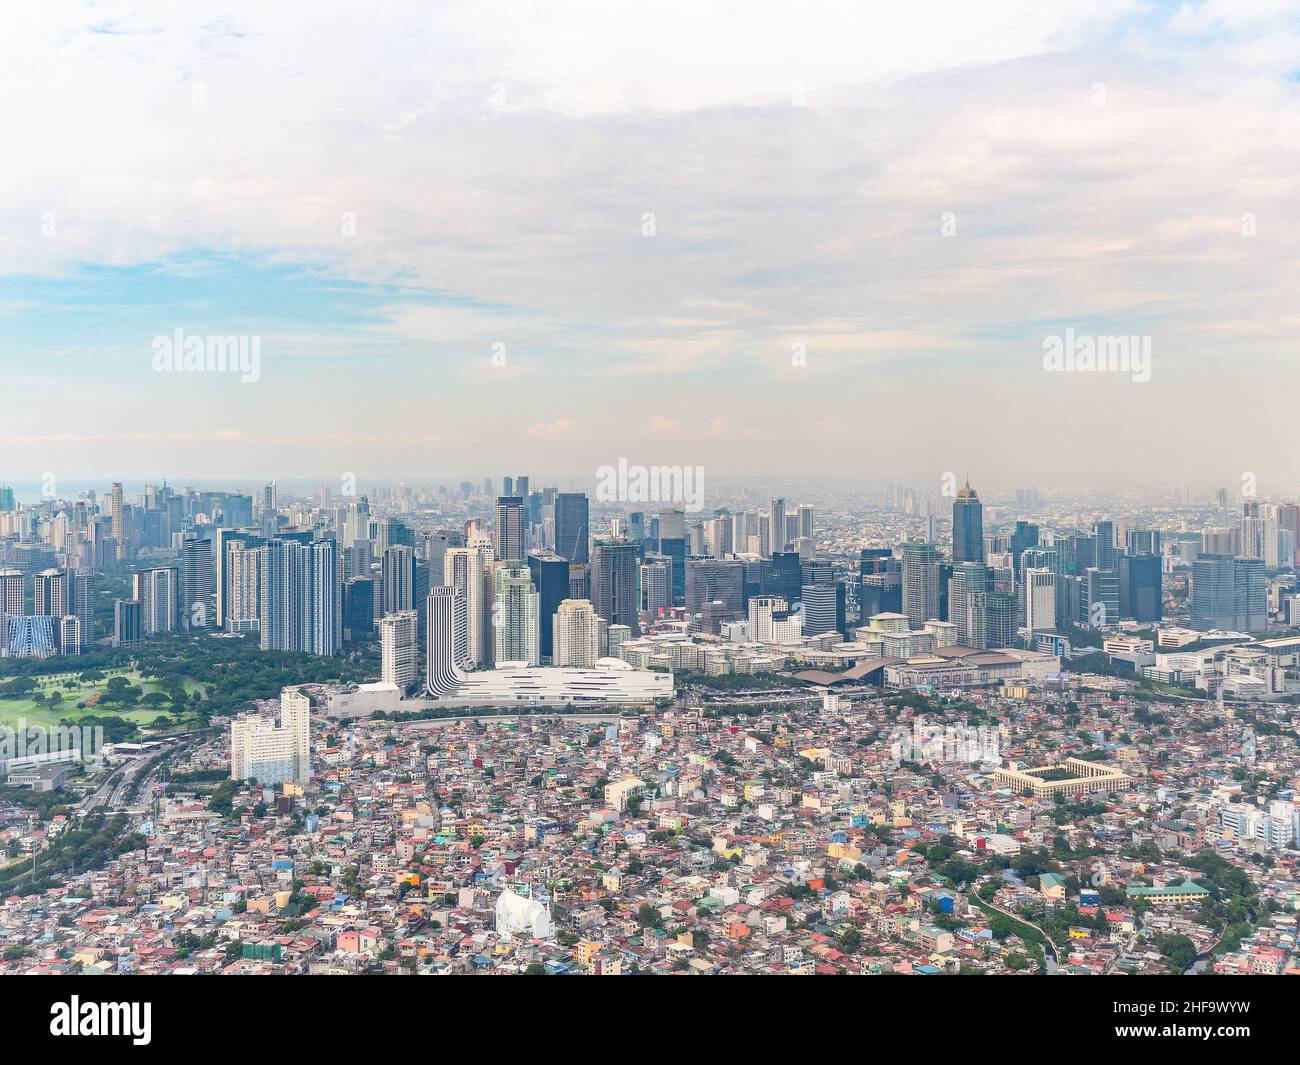 Aerial photo of residential areas in Pembo, Metro Manila, with Bonifacio Global City with its glitzy shopping areas and fashionable high rise building Stock Photo